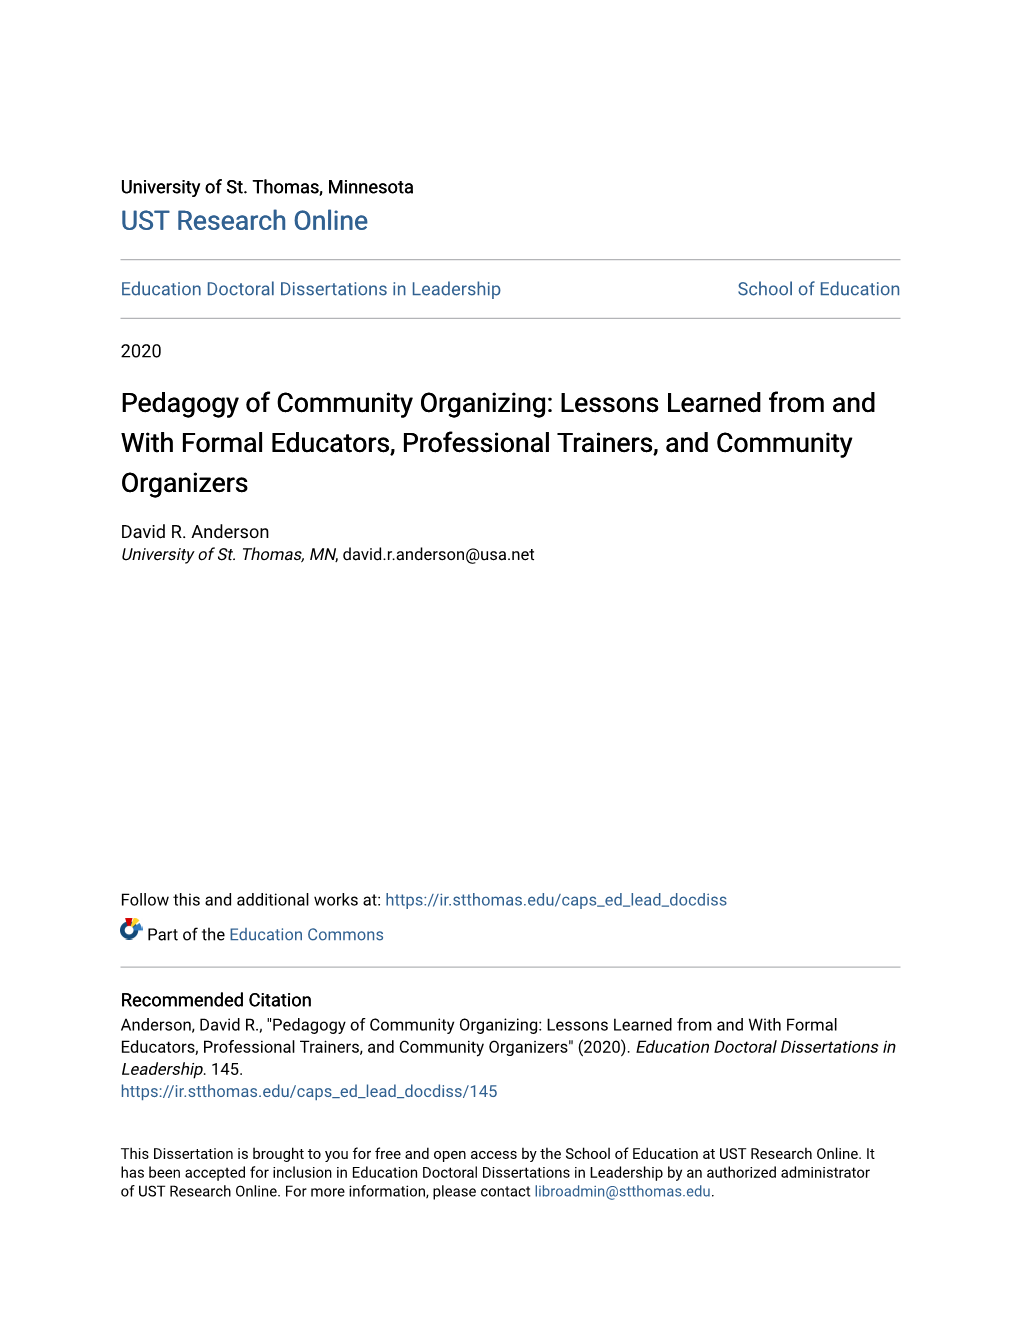 Pedagogy of Community Organizing: Lessons Learned from and with Formal Educators, Professional Trainers, and Community Organizers